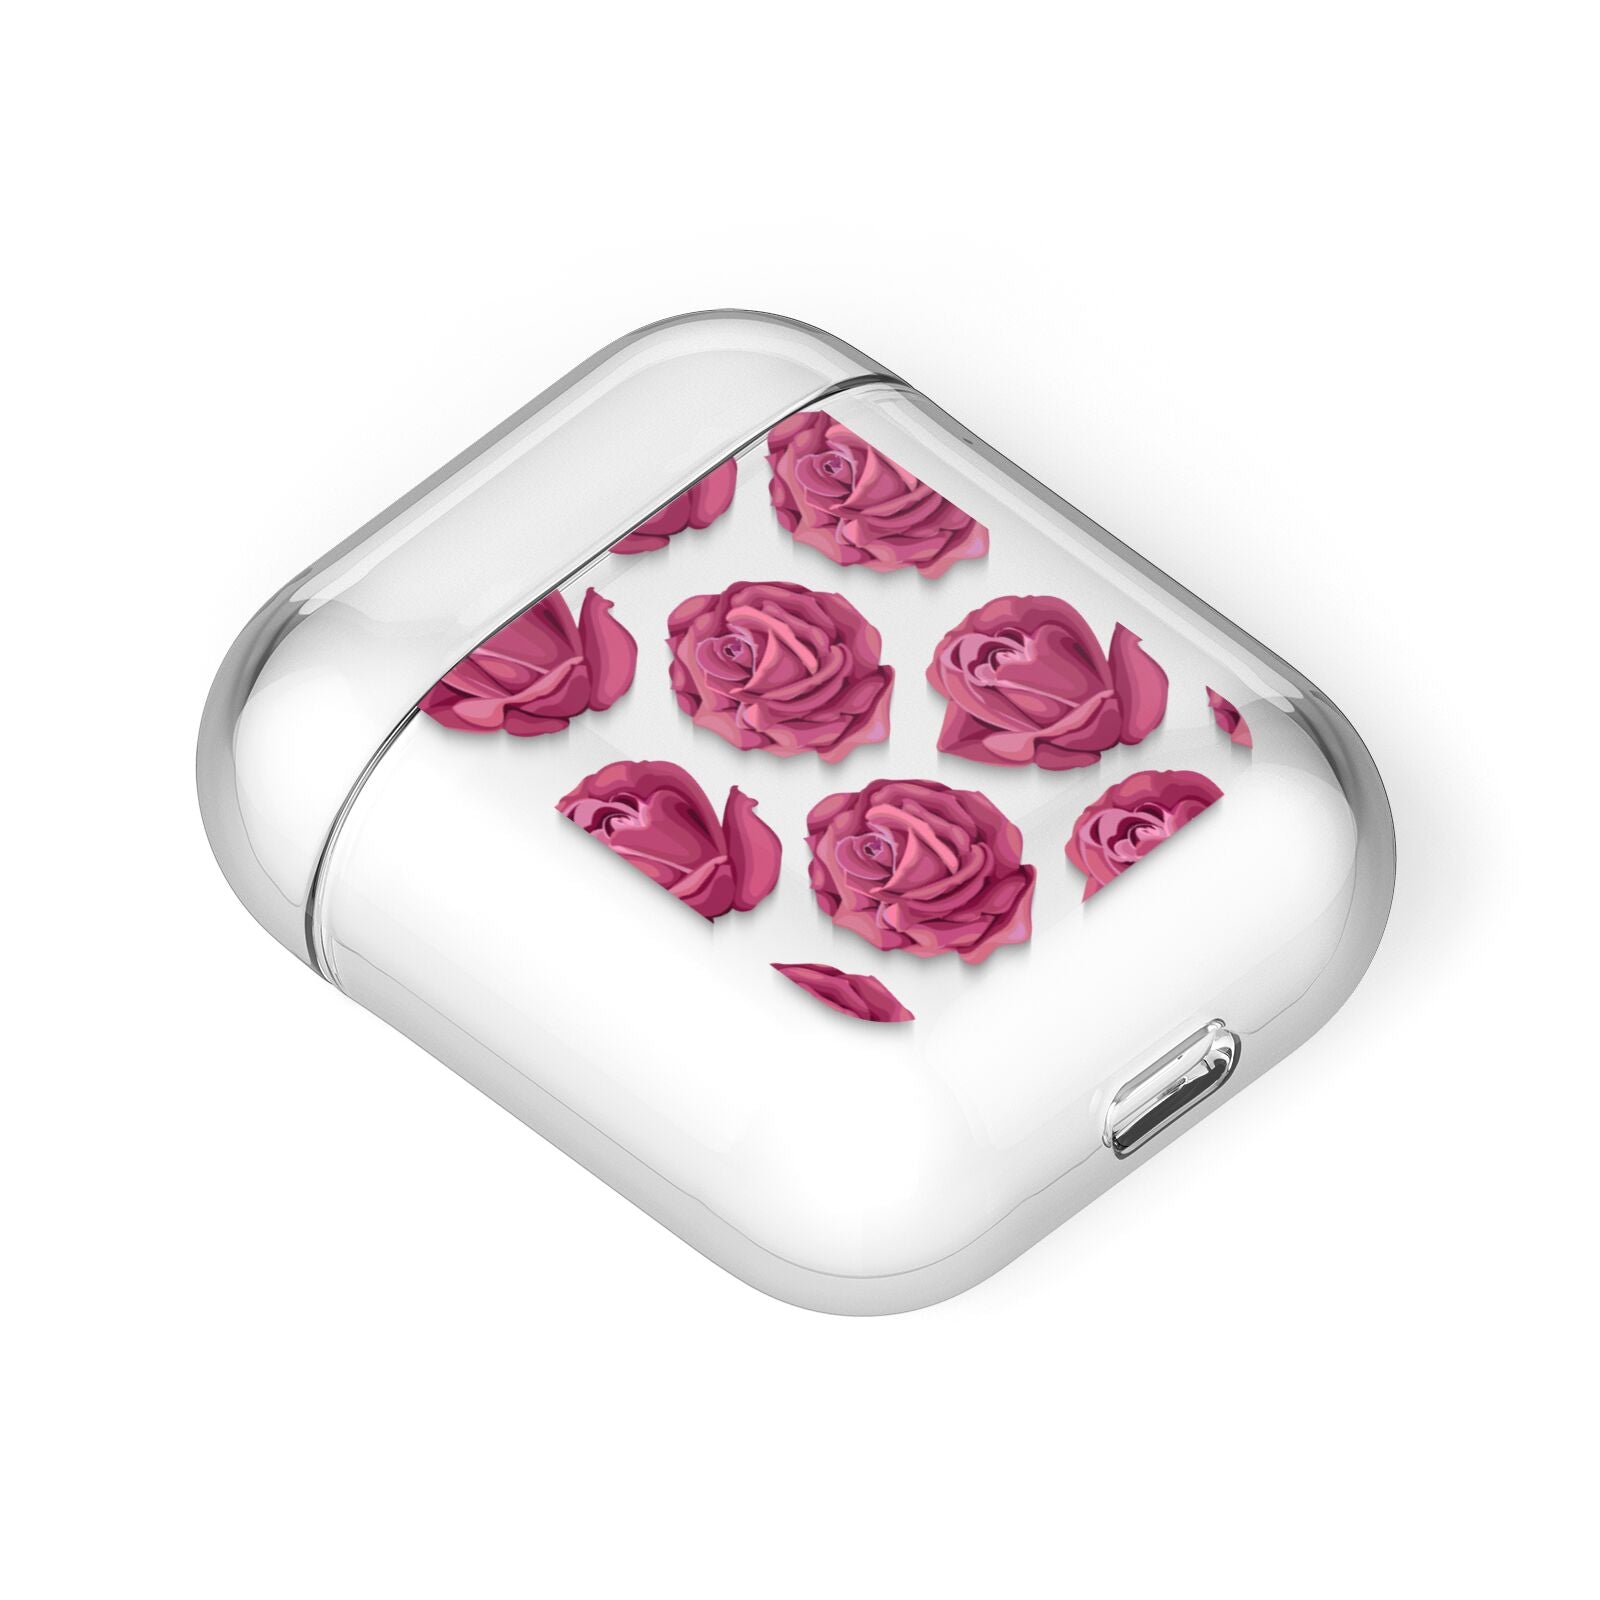 Valentines Roses AirPods Case Laid Flat